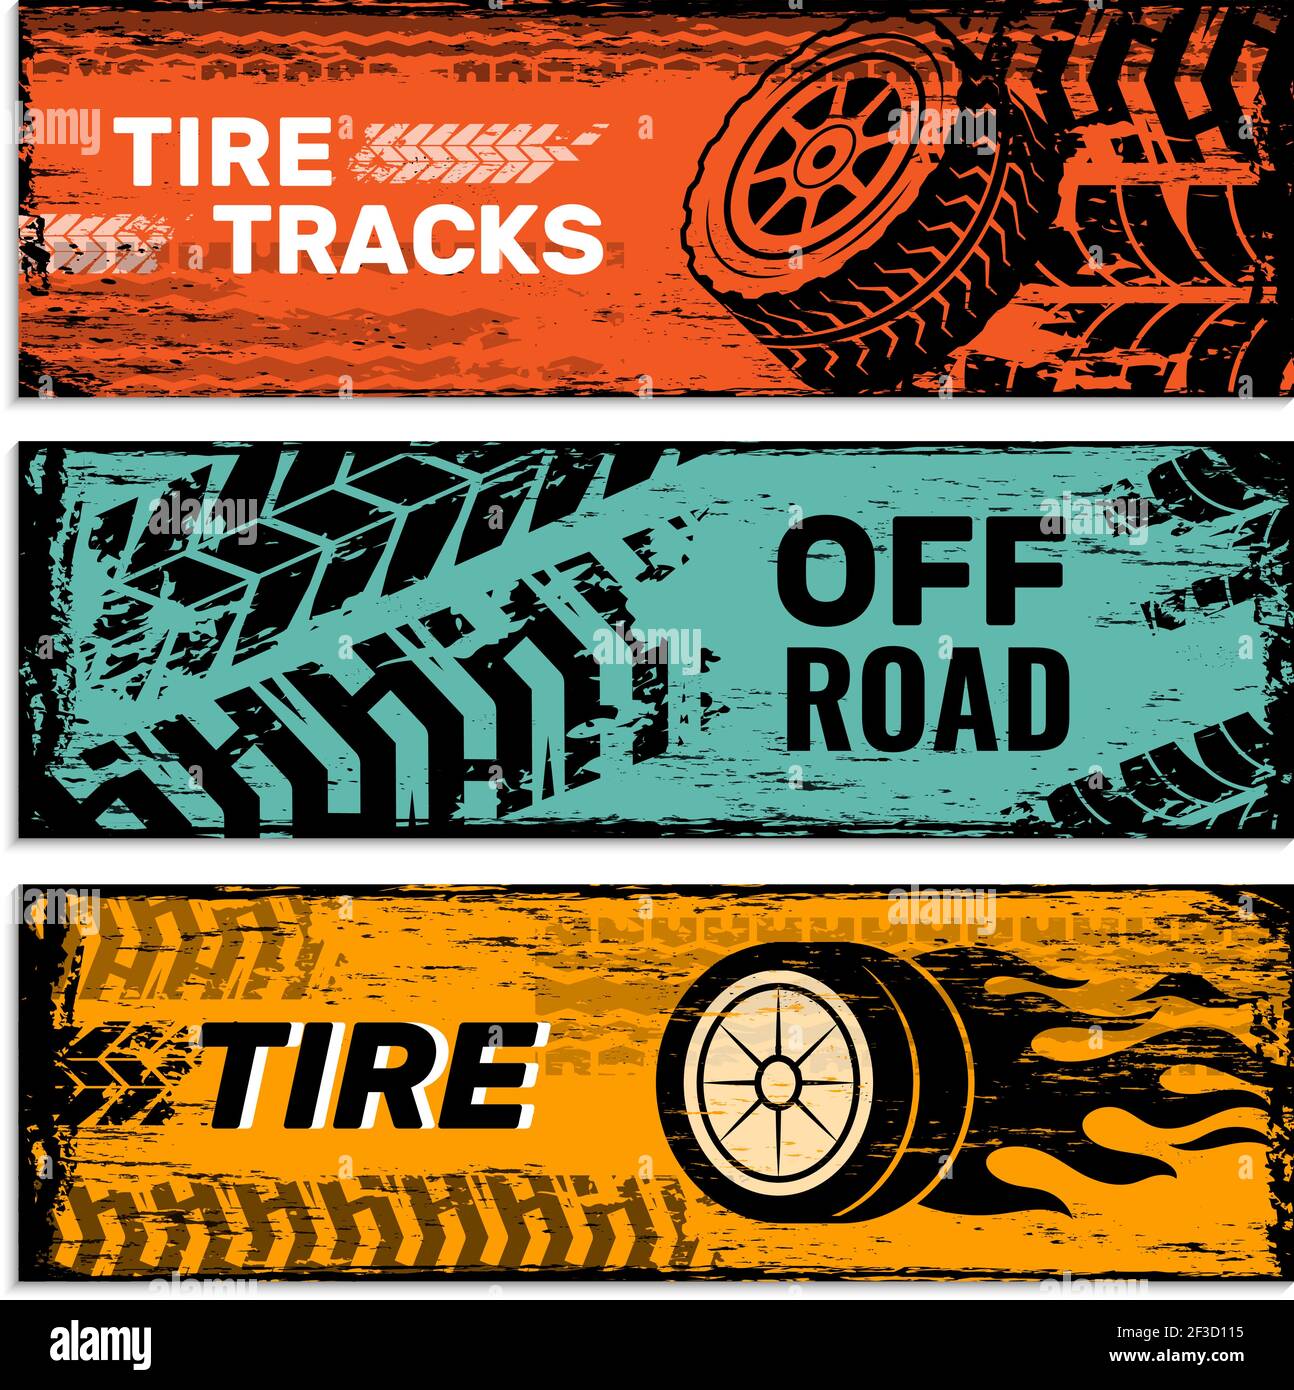 Wheels banners. Tires on road protector car dirt traces vector grunge graphics Stock Vector